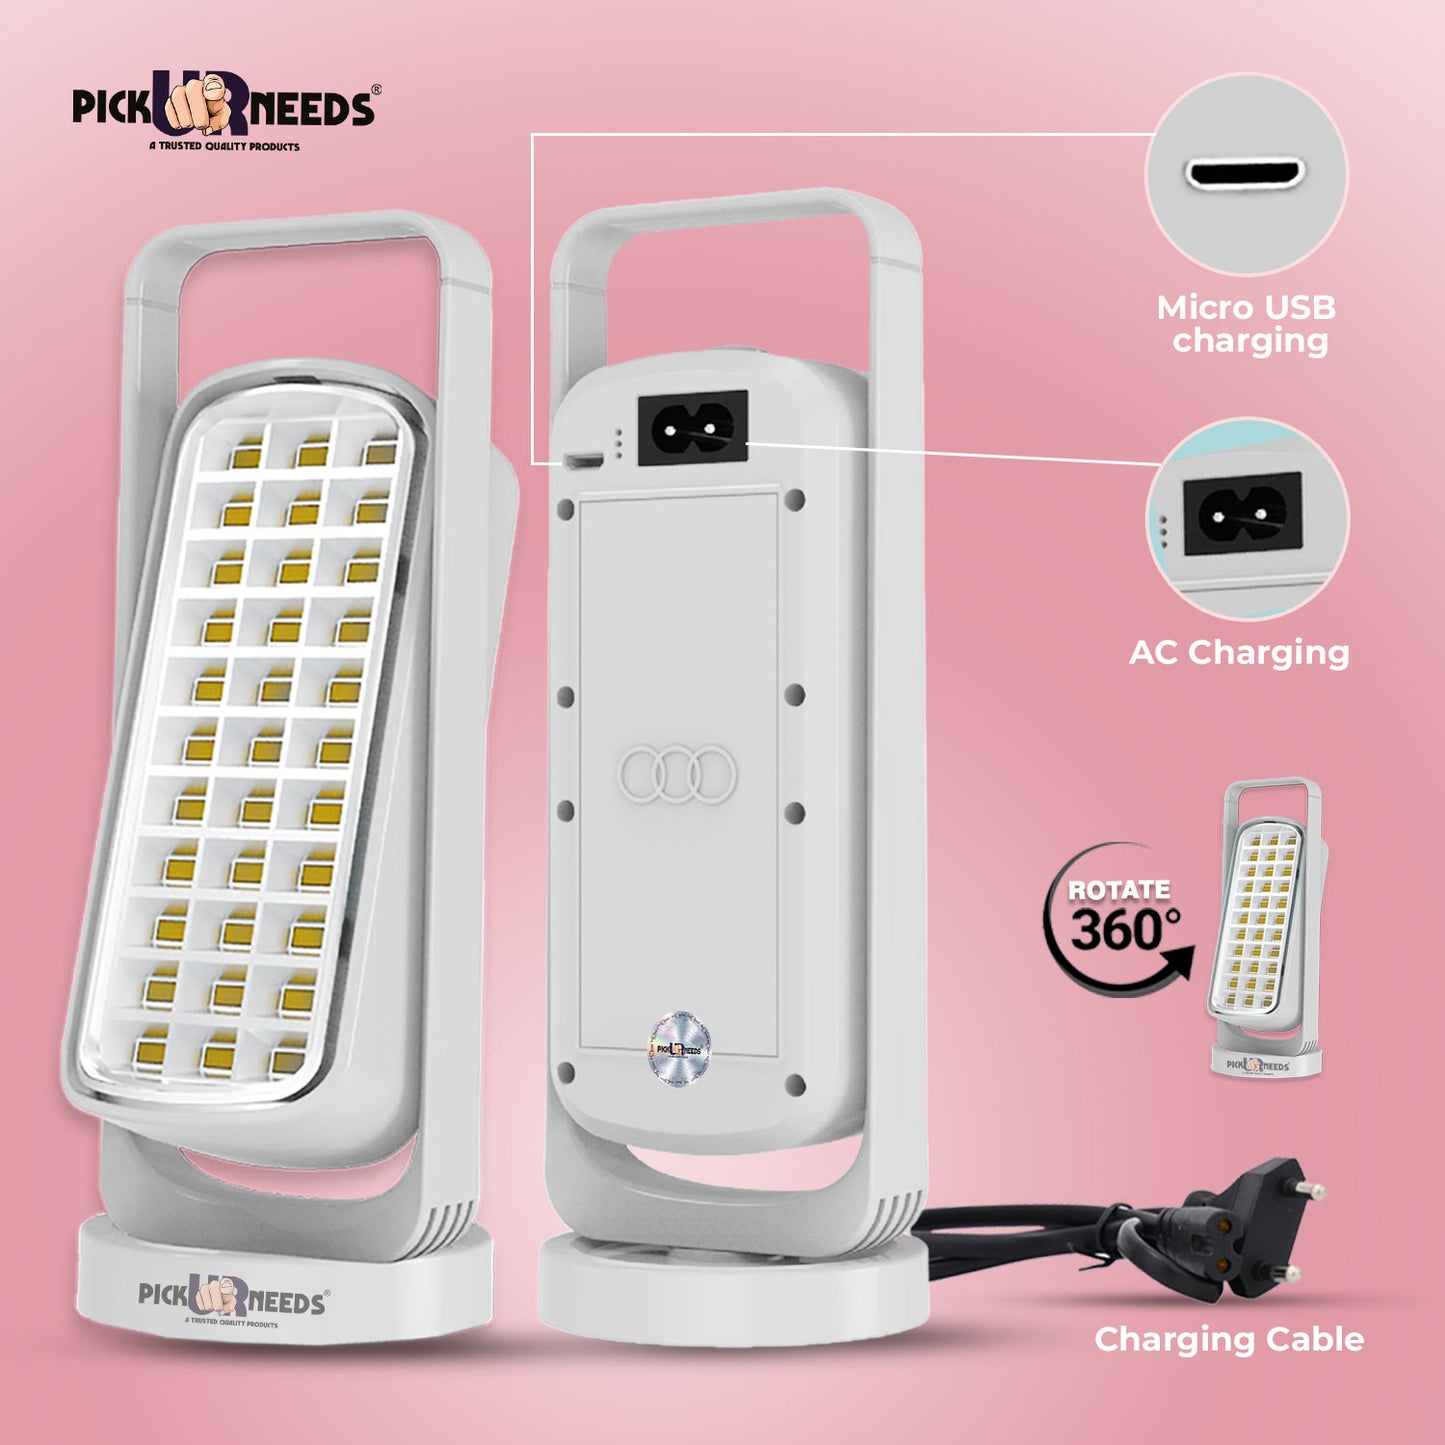 Pick Ur Needs Home Rechargeable Emergency LED Light With 33 SMD Floor & Hanging Lamp Lantern Emergency Light